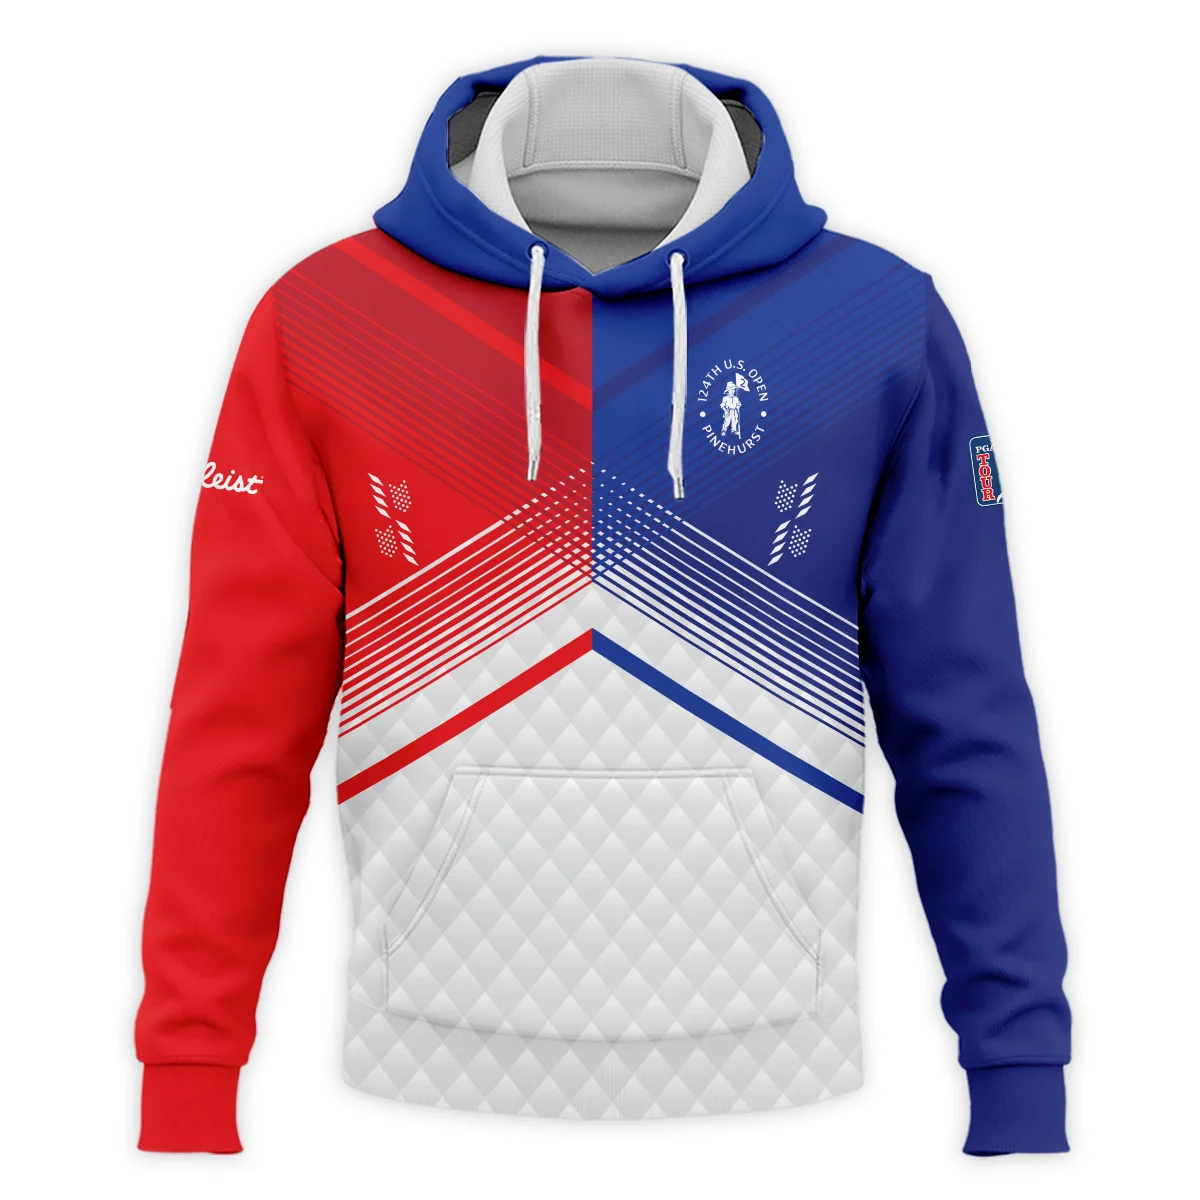 Titleist 124th U.S. Open Pinehurst Blue Red Line White Abstract Quarter-Zip Jacket Style Classic